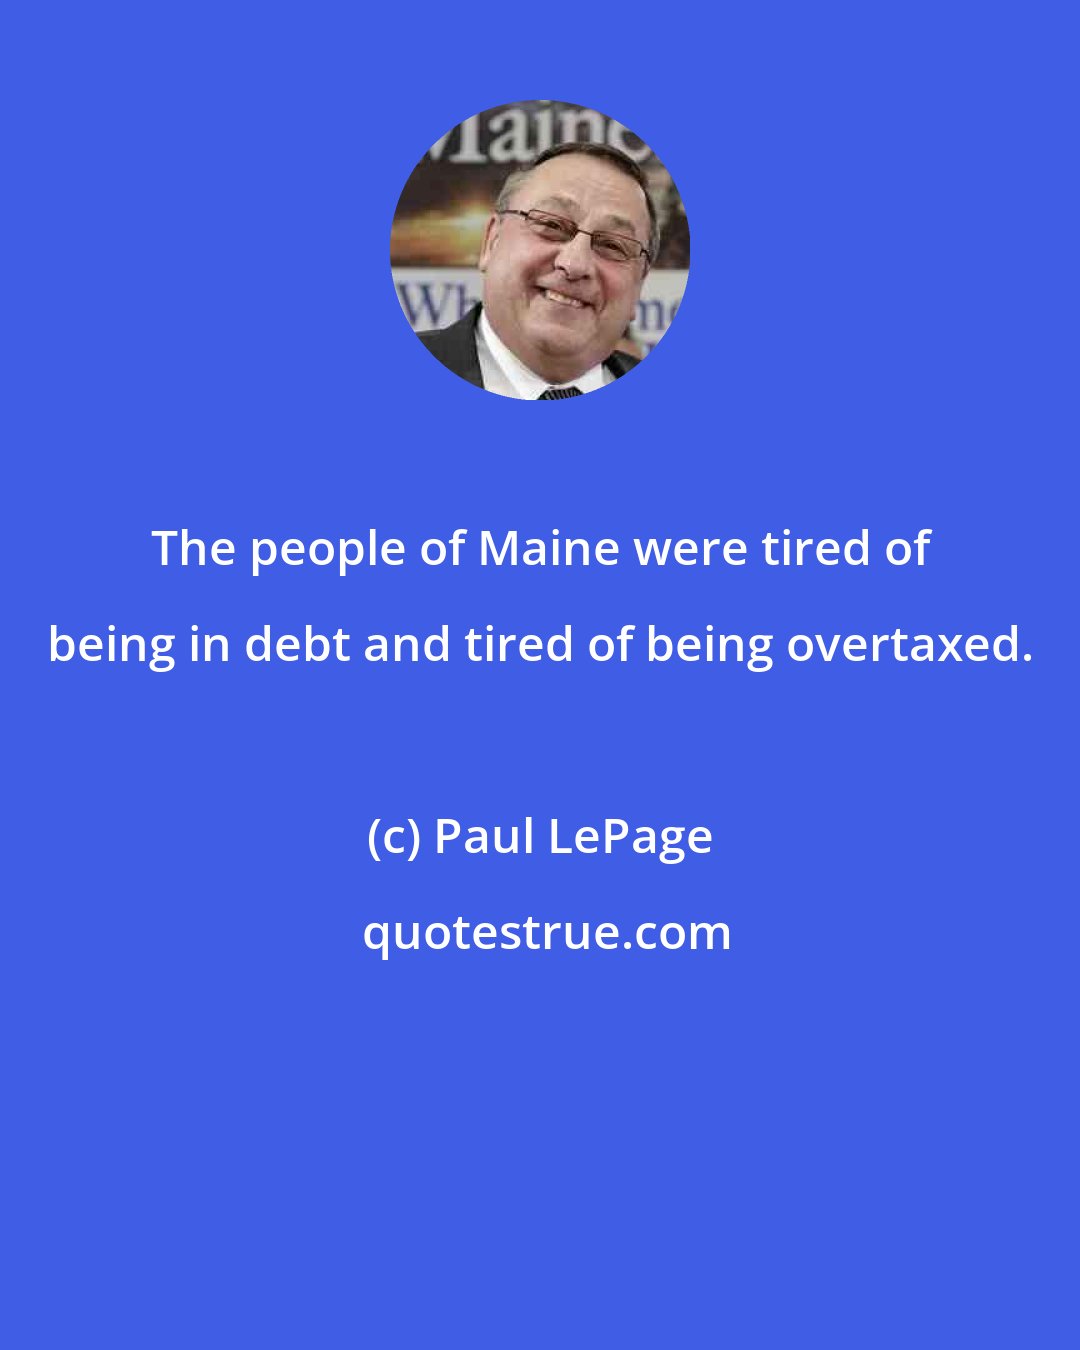 Paul LePage: The people of Maine were tired of being in debt and tired of being overtaxed.